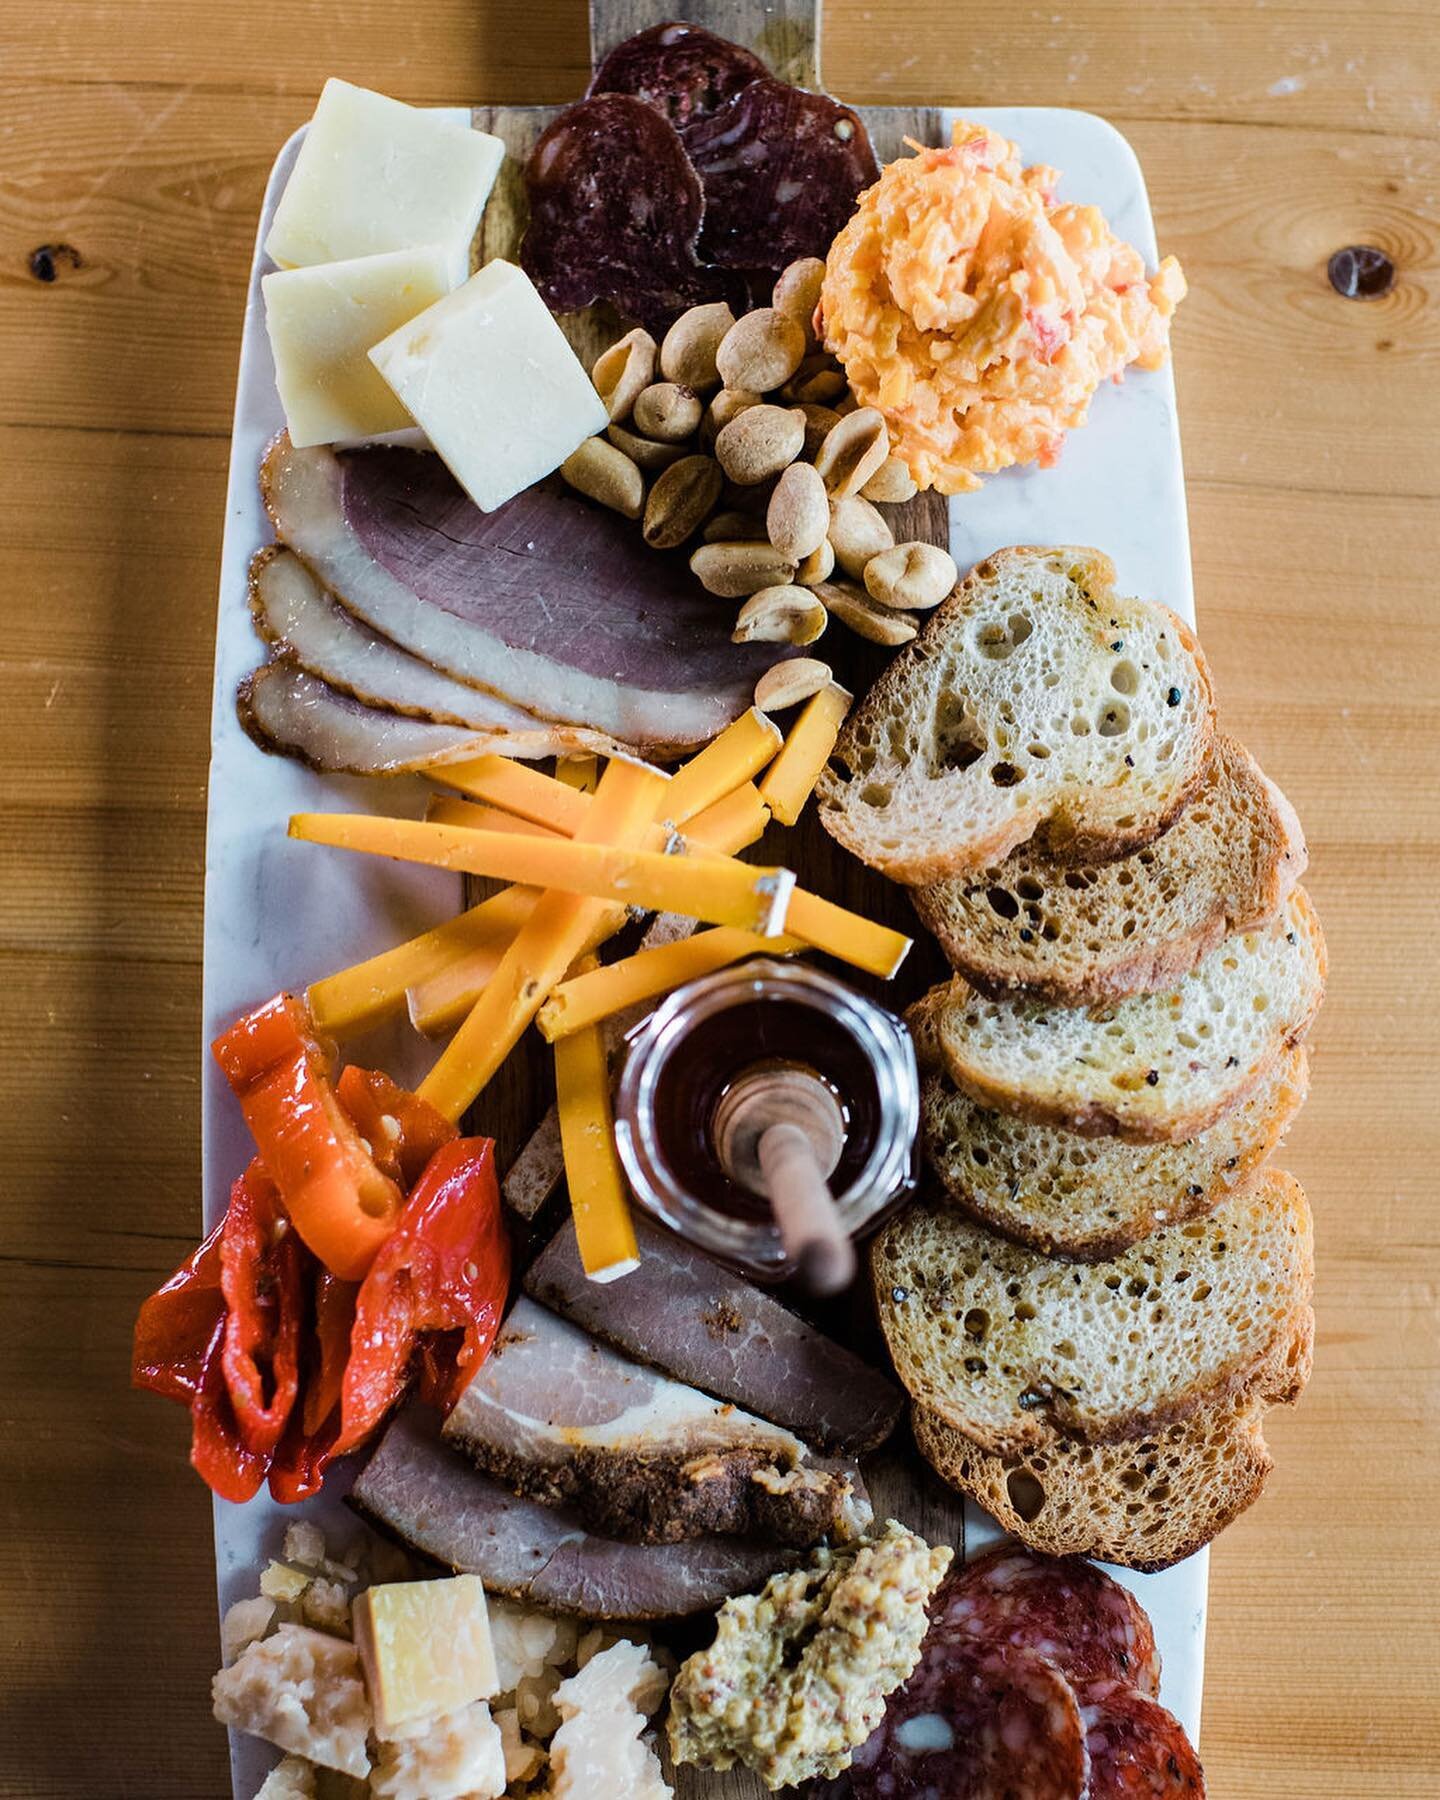 Did you know our website has food + wine pairings to top off your experience here? Our Sommelier, Kendra, has paired our menu&rsquo;s fan favorites with the best bottles on our shelves! 

Paired with this Southern Charcuterie Board is our Voces Caber